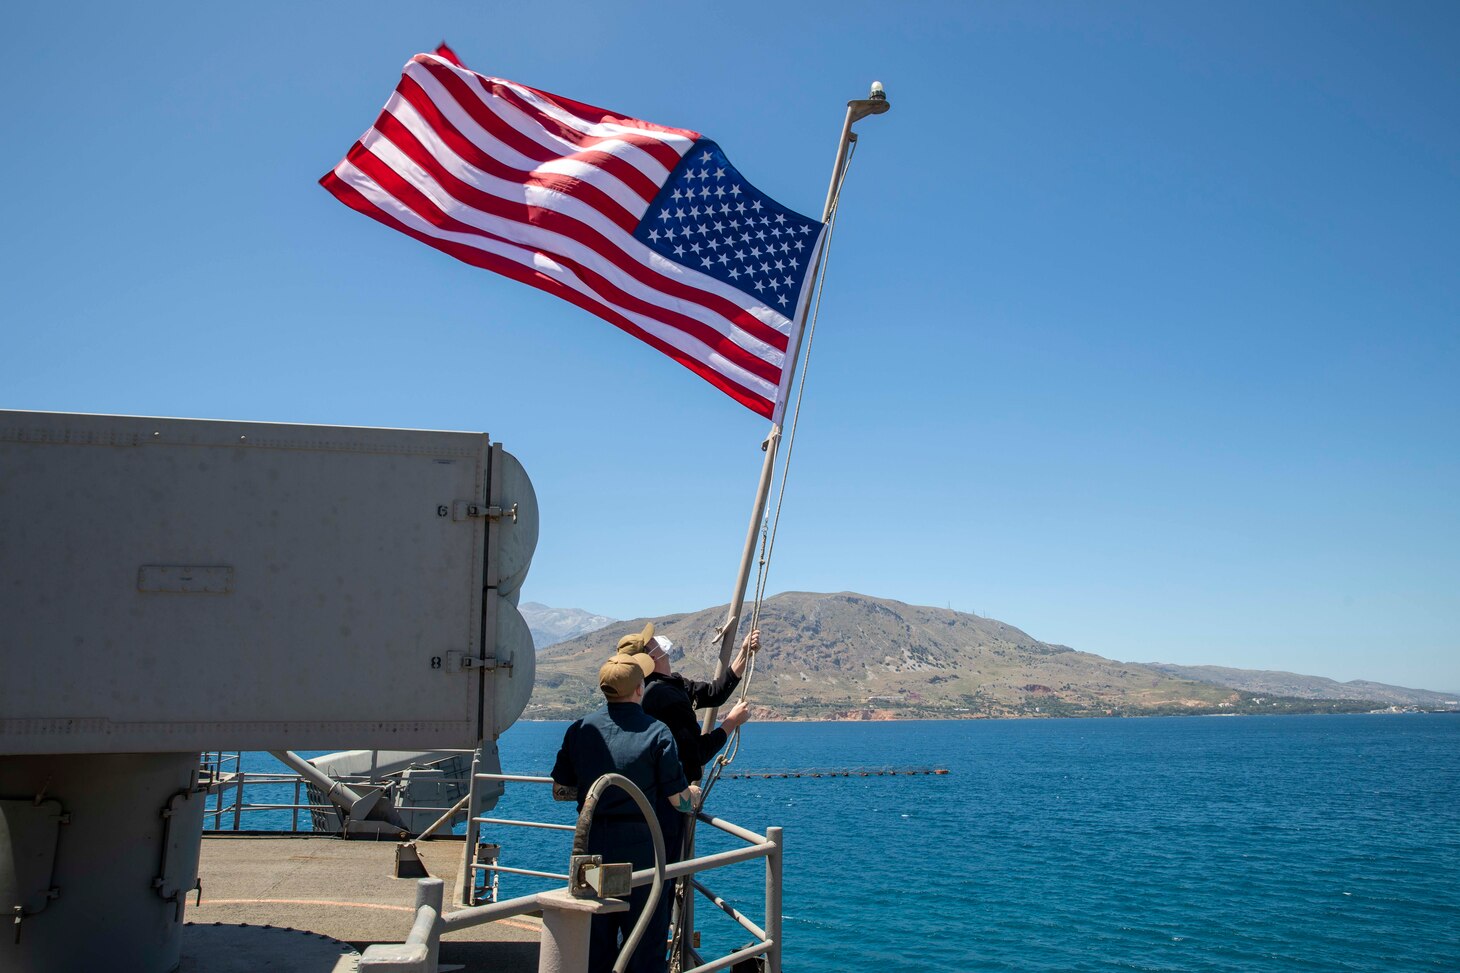 Sailors shift colors as the Wasp-class amphibious assault ship USS Iwo Jima (LHD 7) moored in Souda Bay, Greece, May 27, 2021. Iwo Jima is underway in the Mediterranean Sea with Amphibious Squadron 4 and 24th MEU as part of the Iwo Jima Amphibious Ready Group.